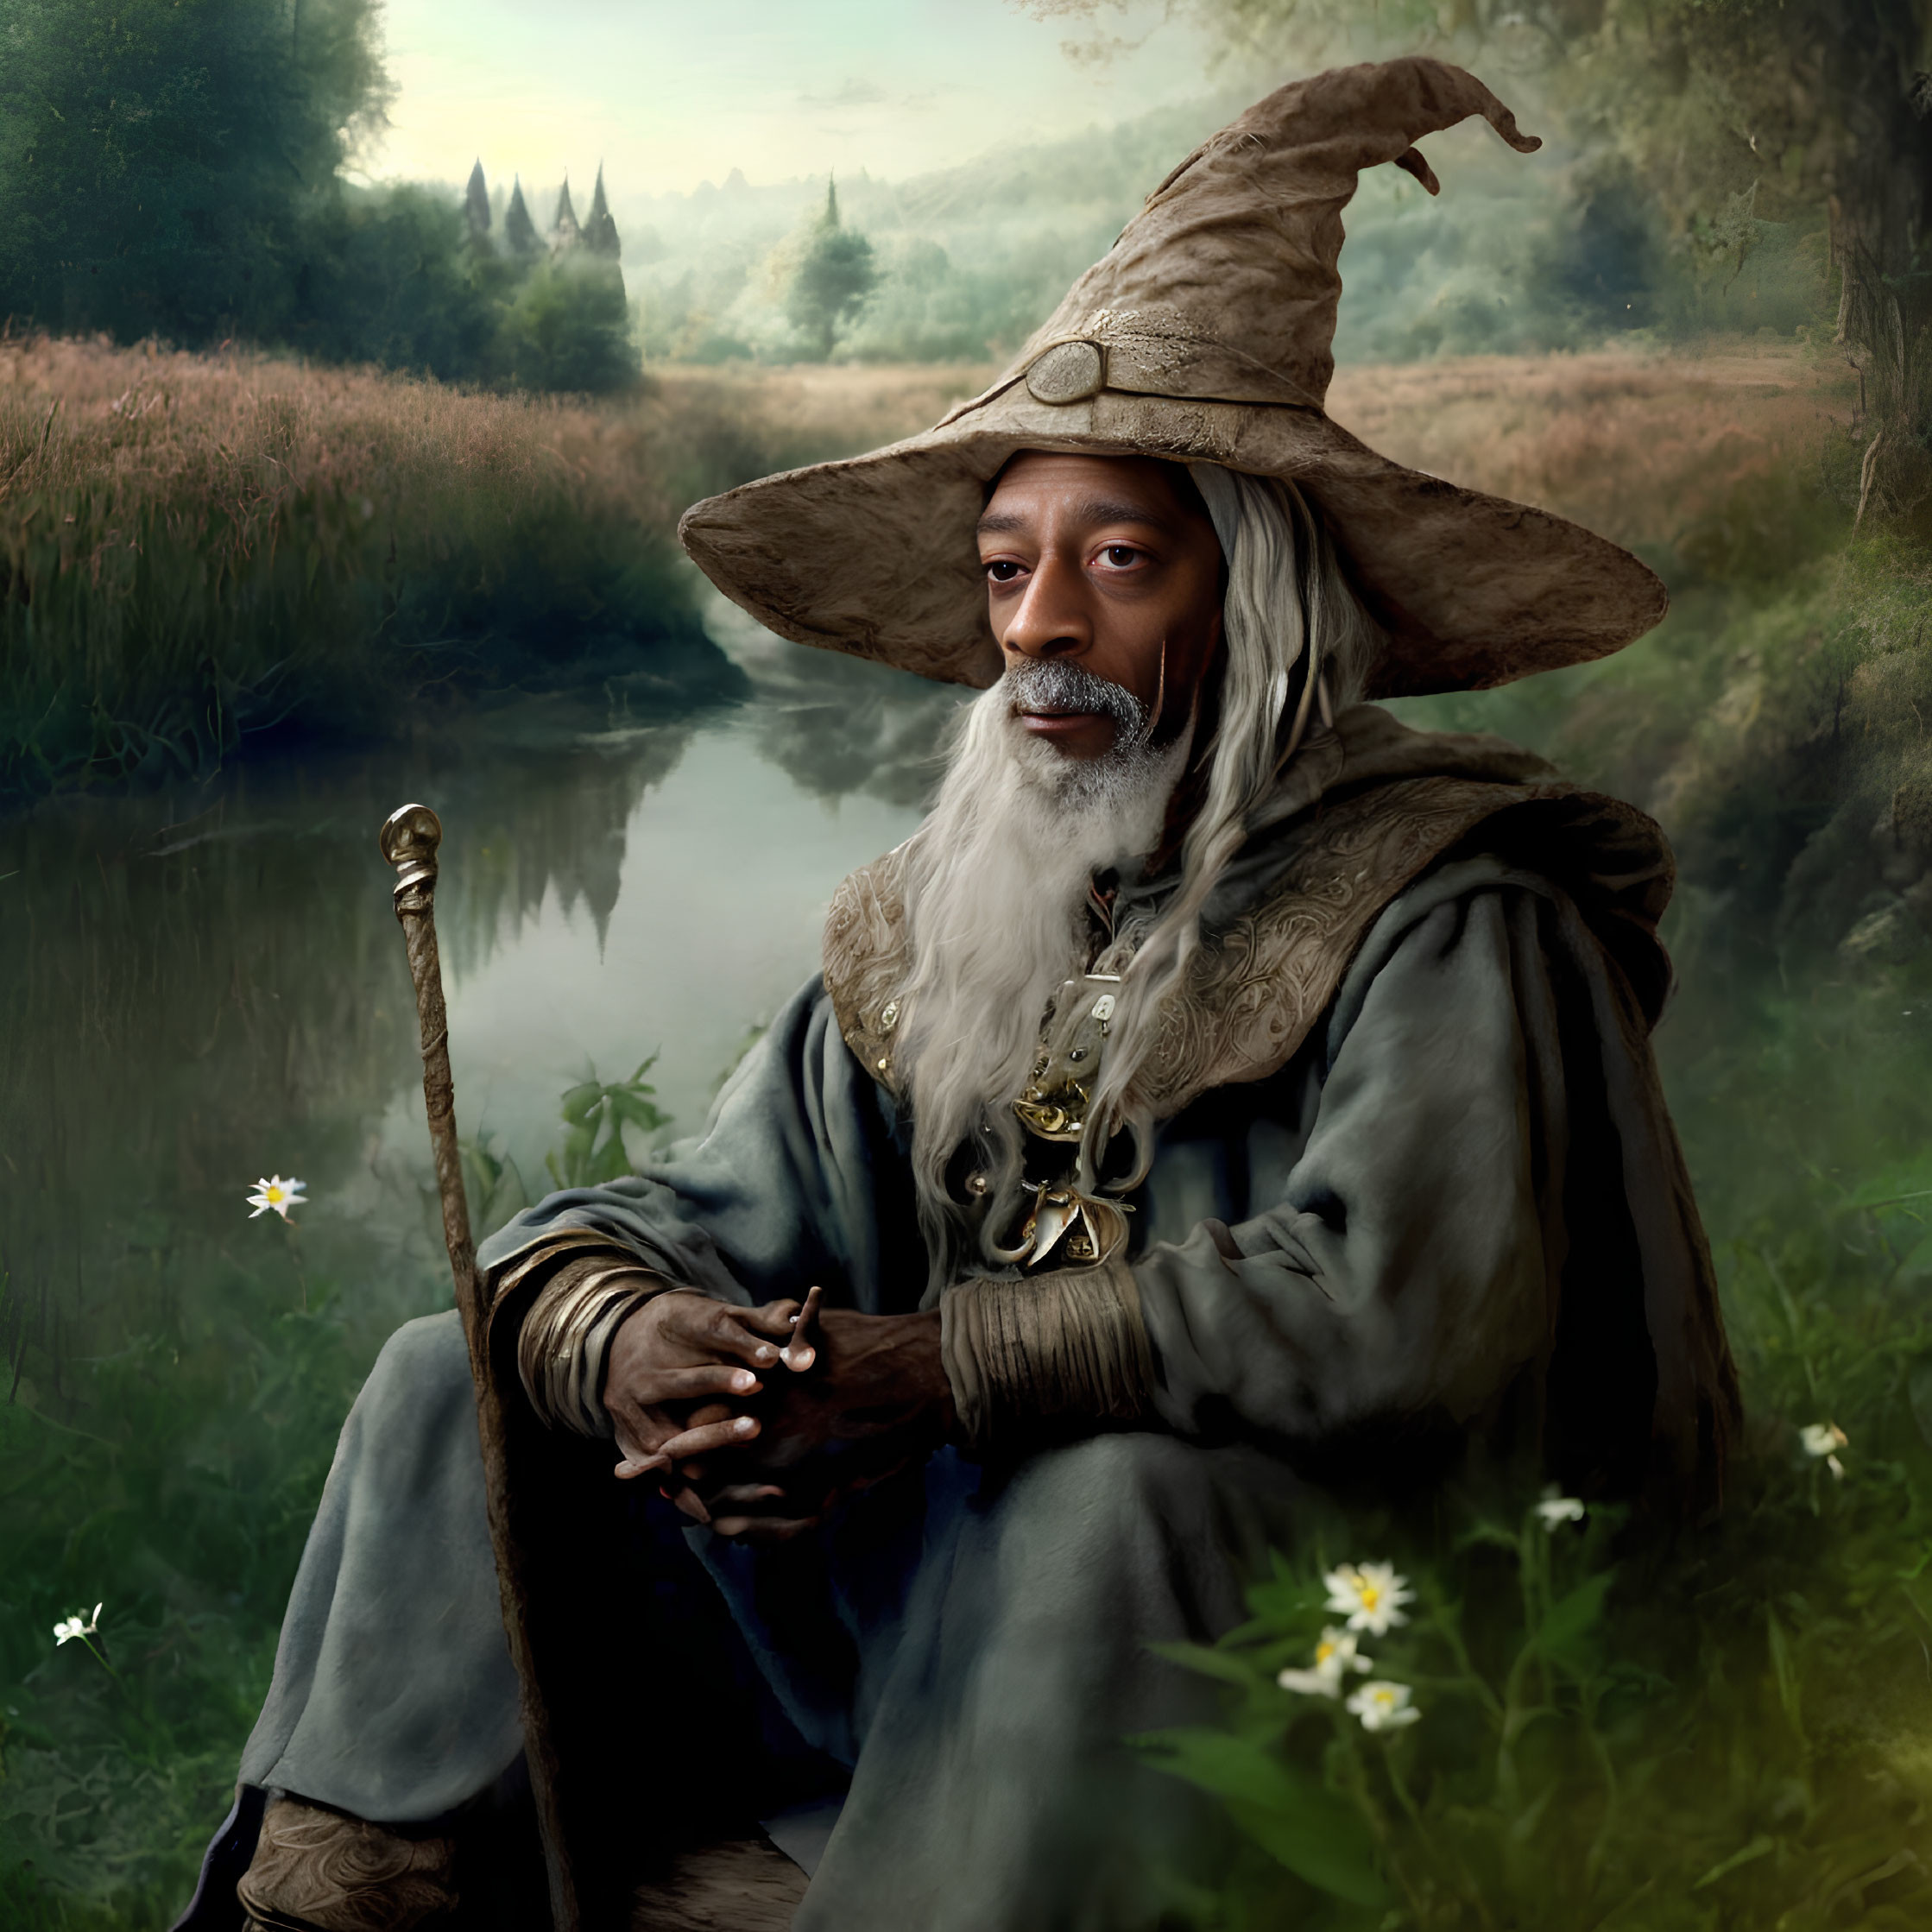 Bearded person in wizard costume with staff by serene pond